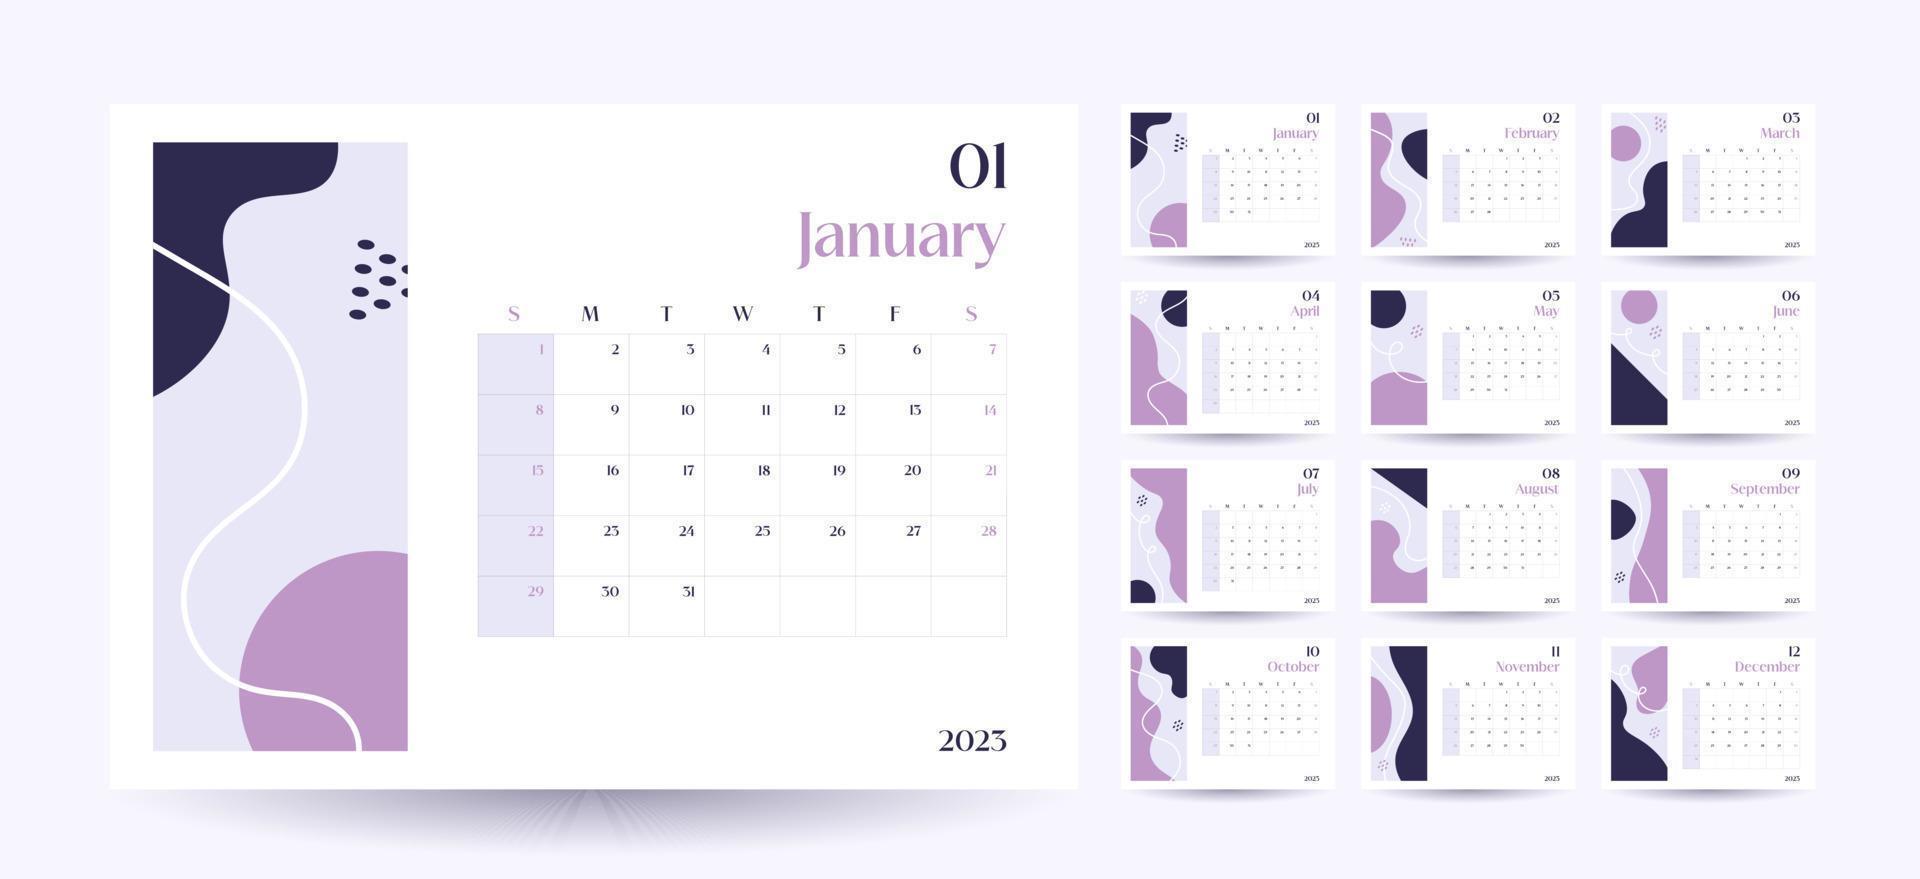 Monthly wall calendar 2023 template in trendy minimalist Style, cover concept, set of 12 pages desk calendar, 2023 minimal calendar planner design for printing template in purple vector